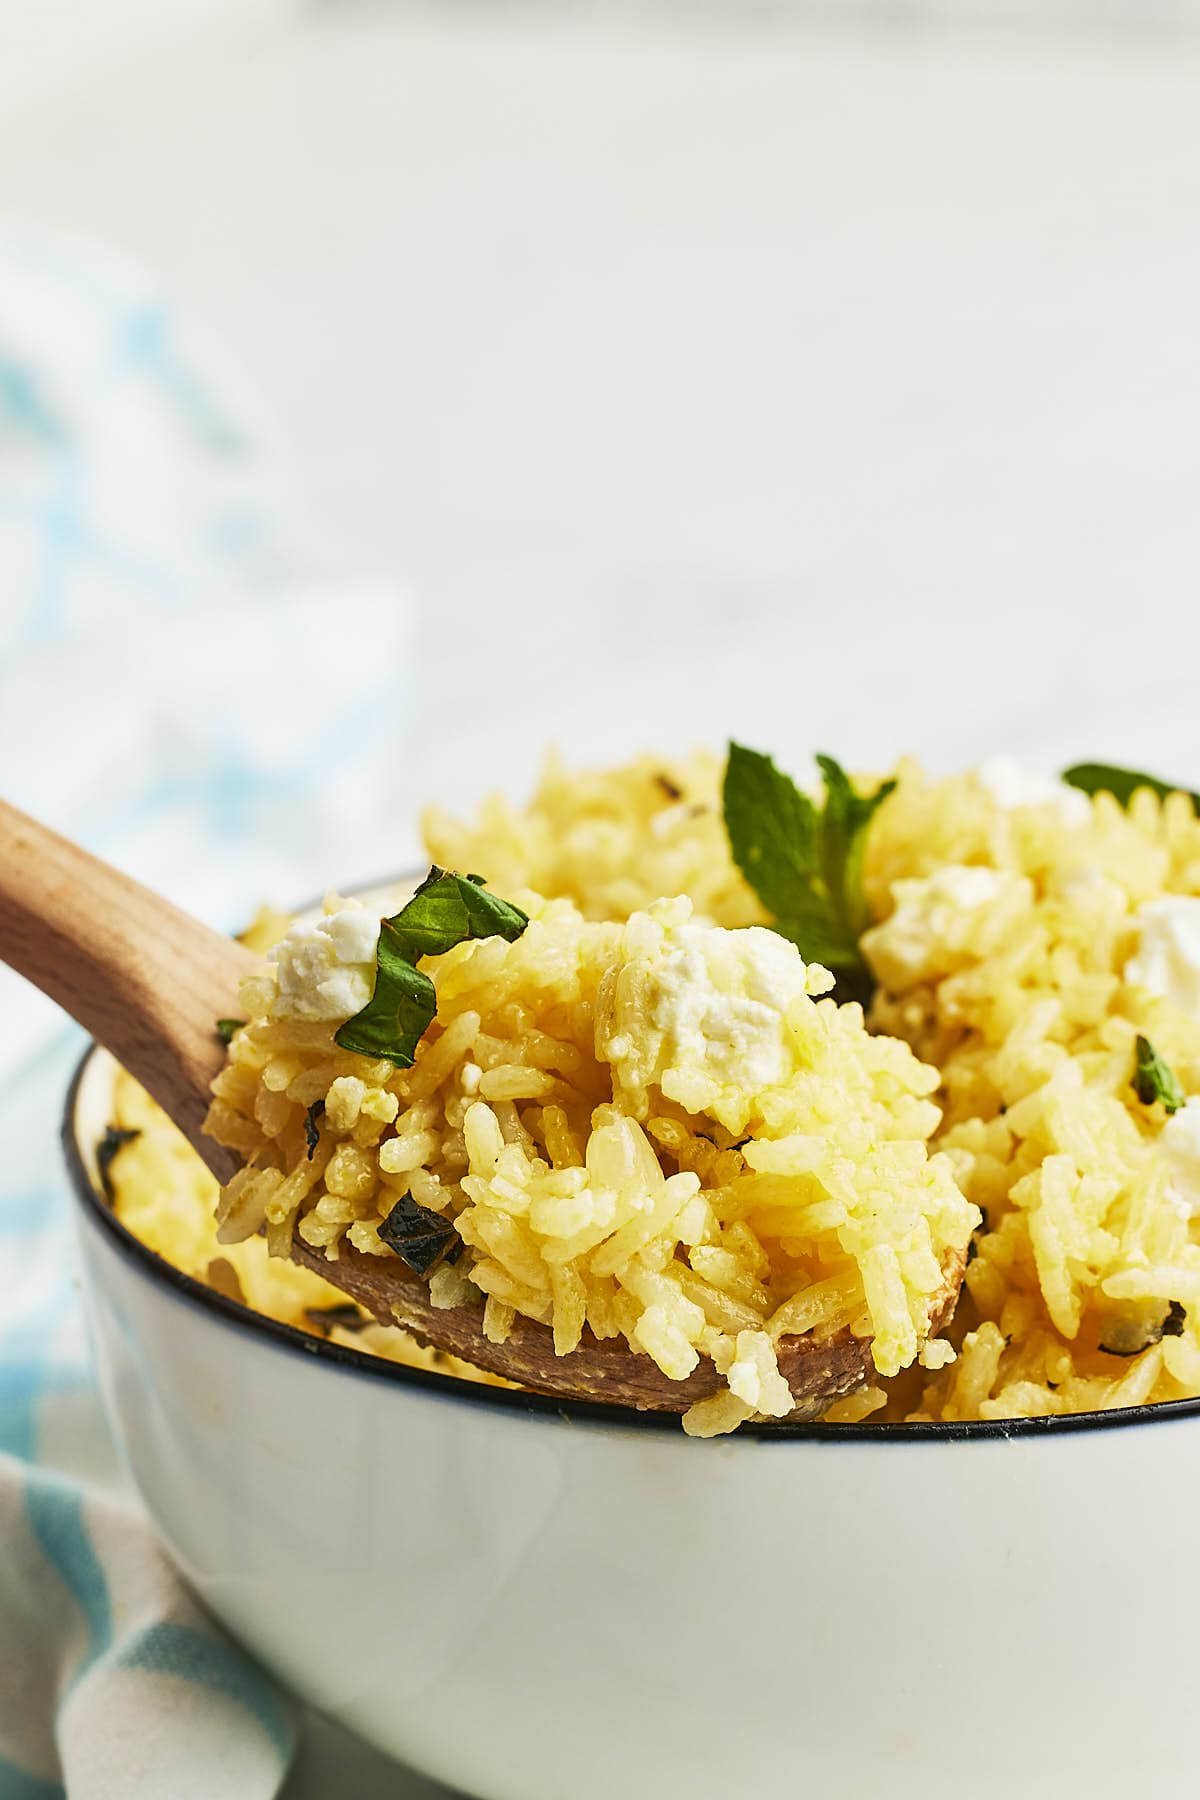 A spoonful of freshly cooked Mint Rice with Feta cheese.